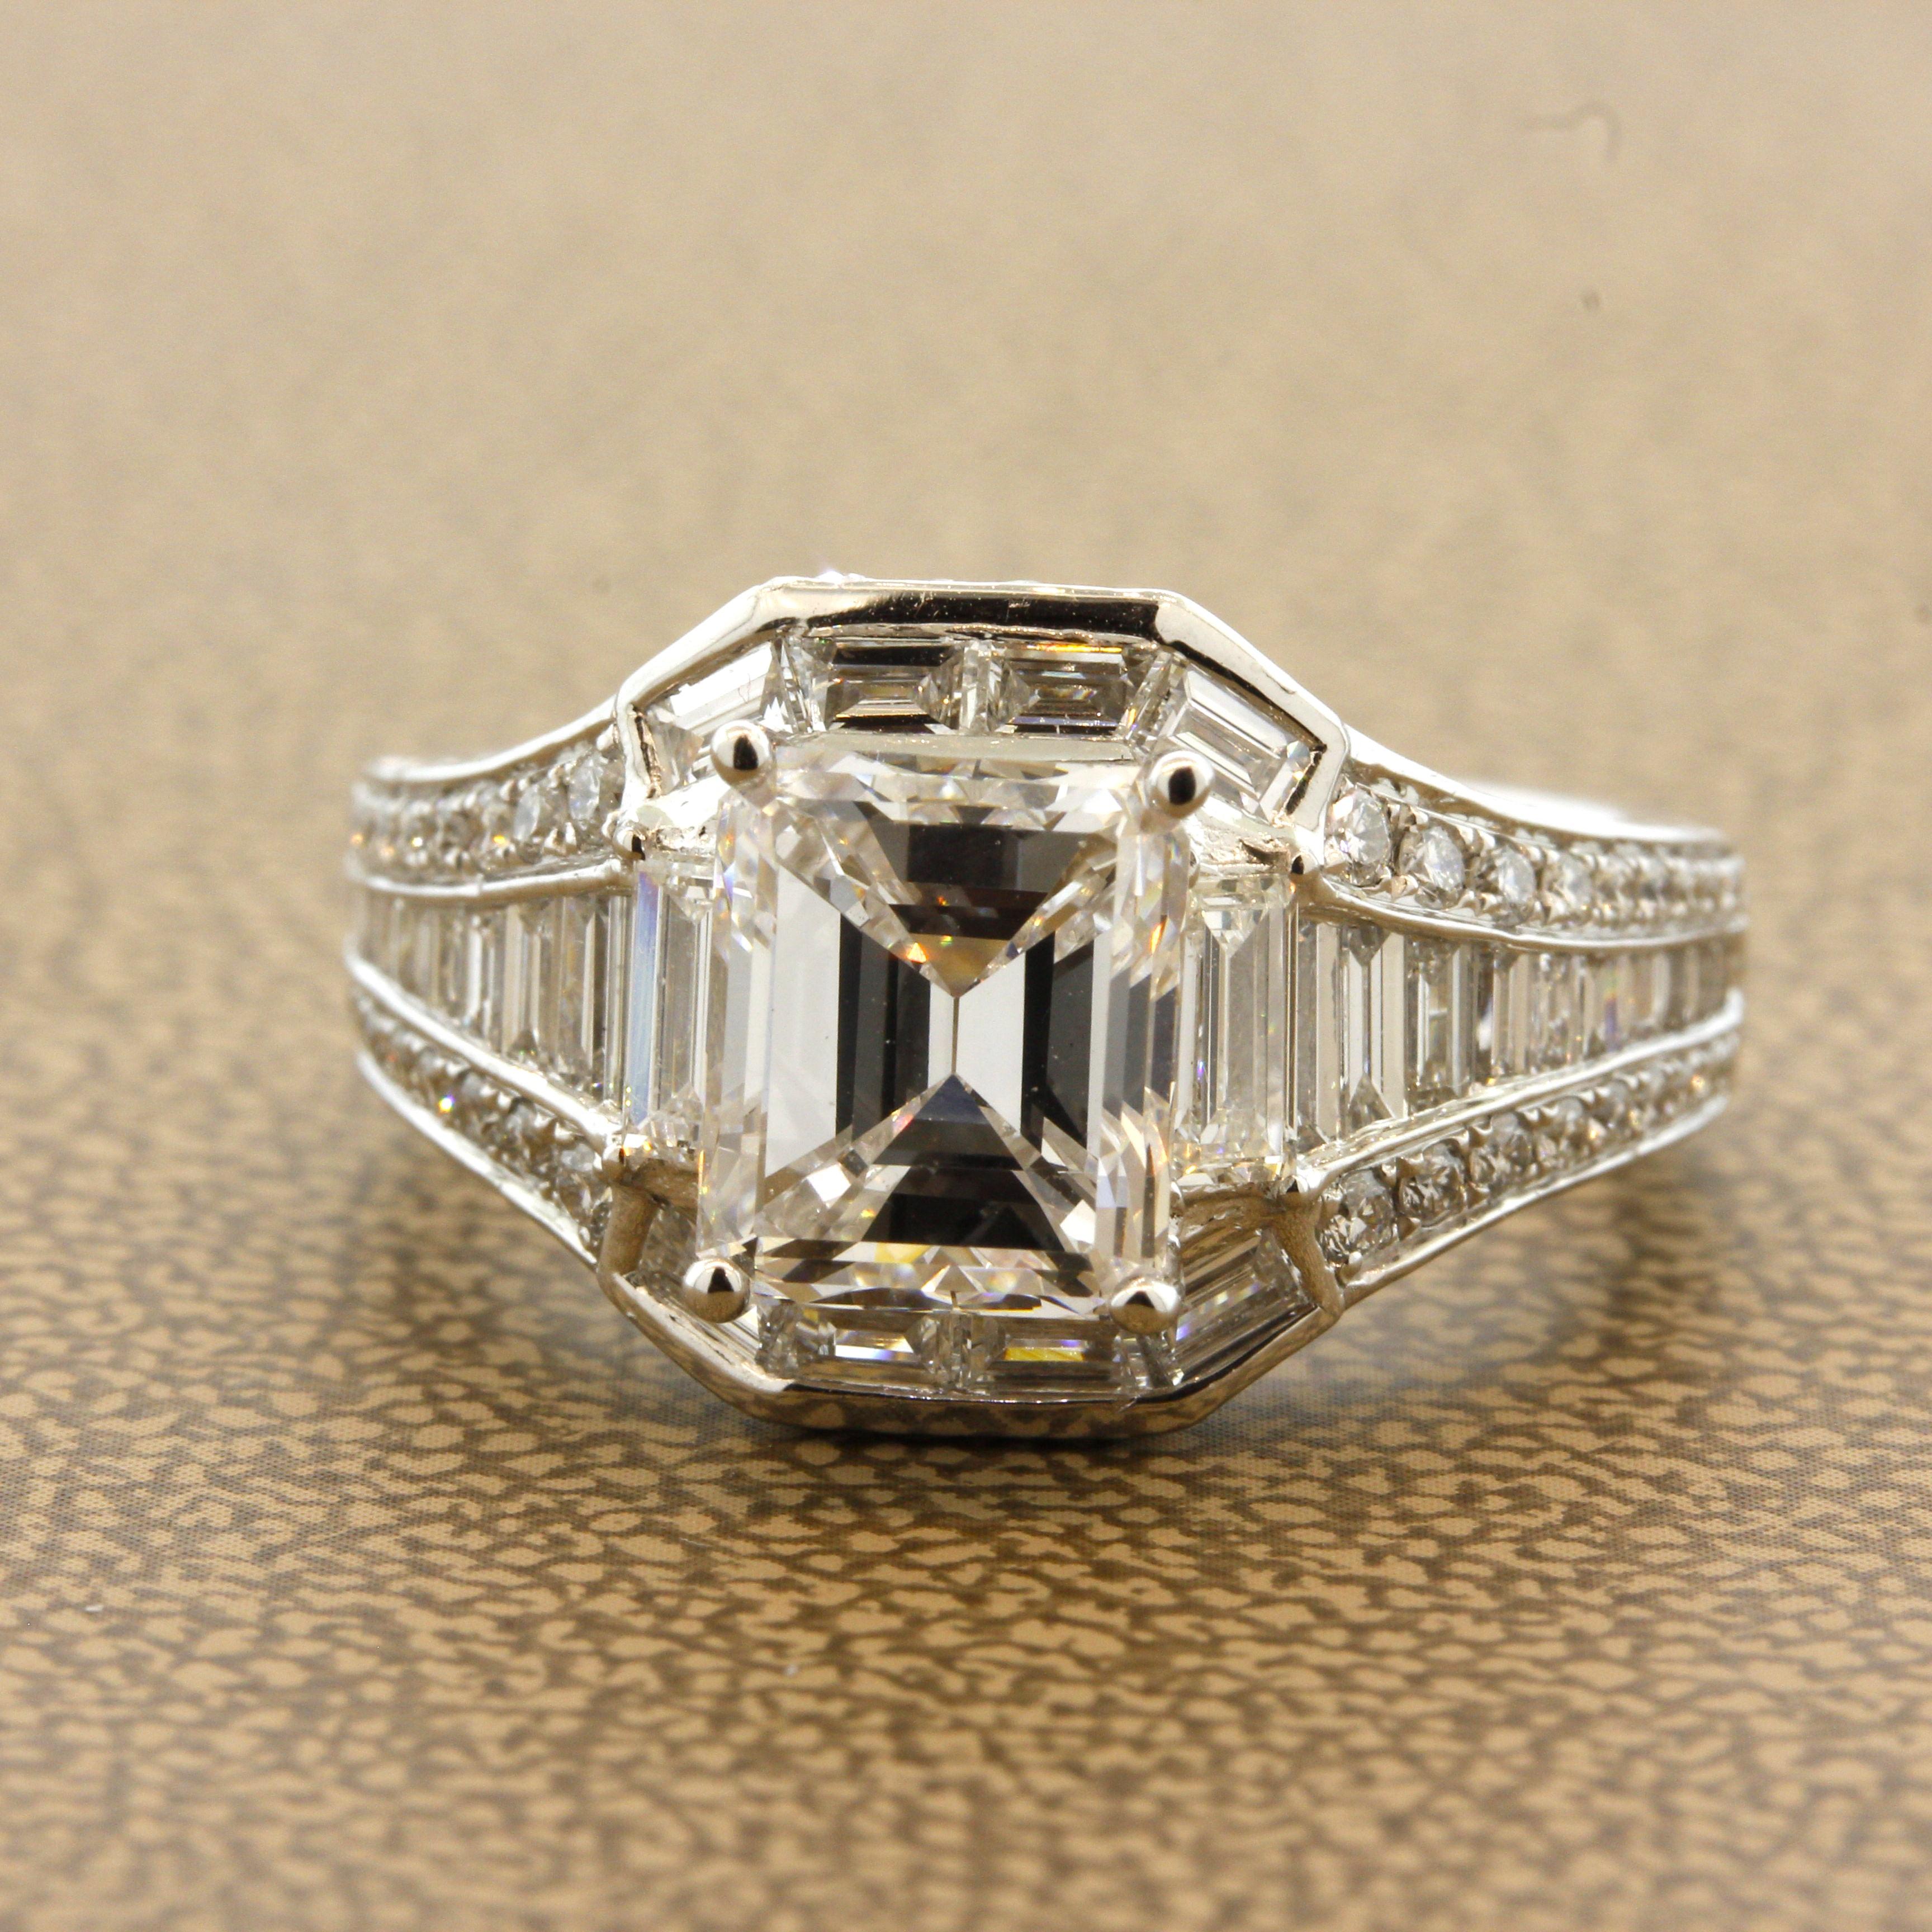 A bright, clean and beautiful diamond, graded and certified by the GIA takes center stage! The diamond is a lovely emerald-cut with a color grade of E and clarity grade of VS1, making it nearly visibly indistinguishable from a “perfect” D-Flawless